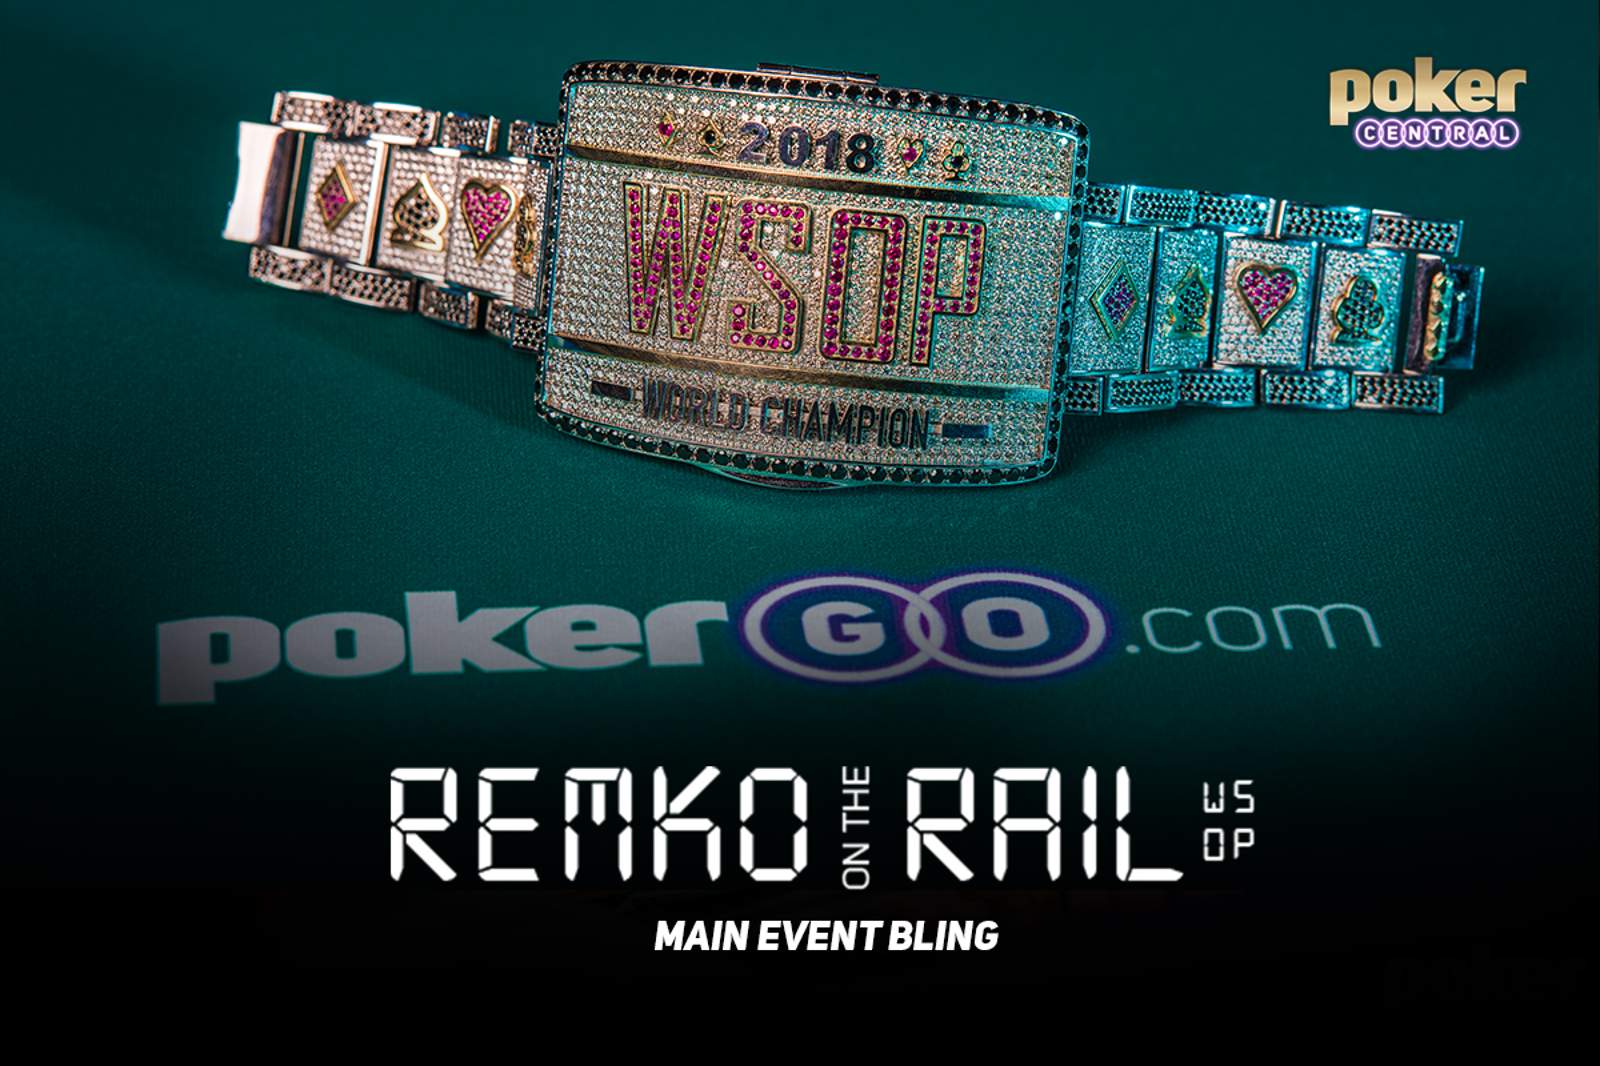 Remko on the Rail - Main Event Bling!